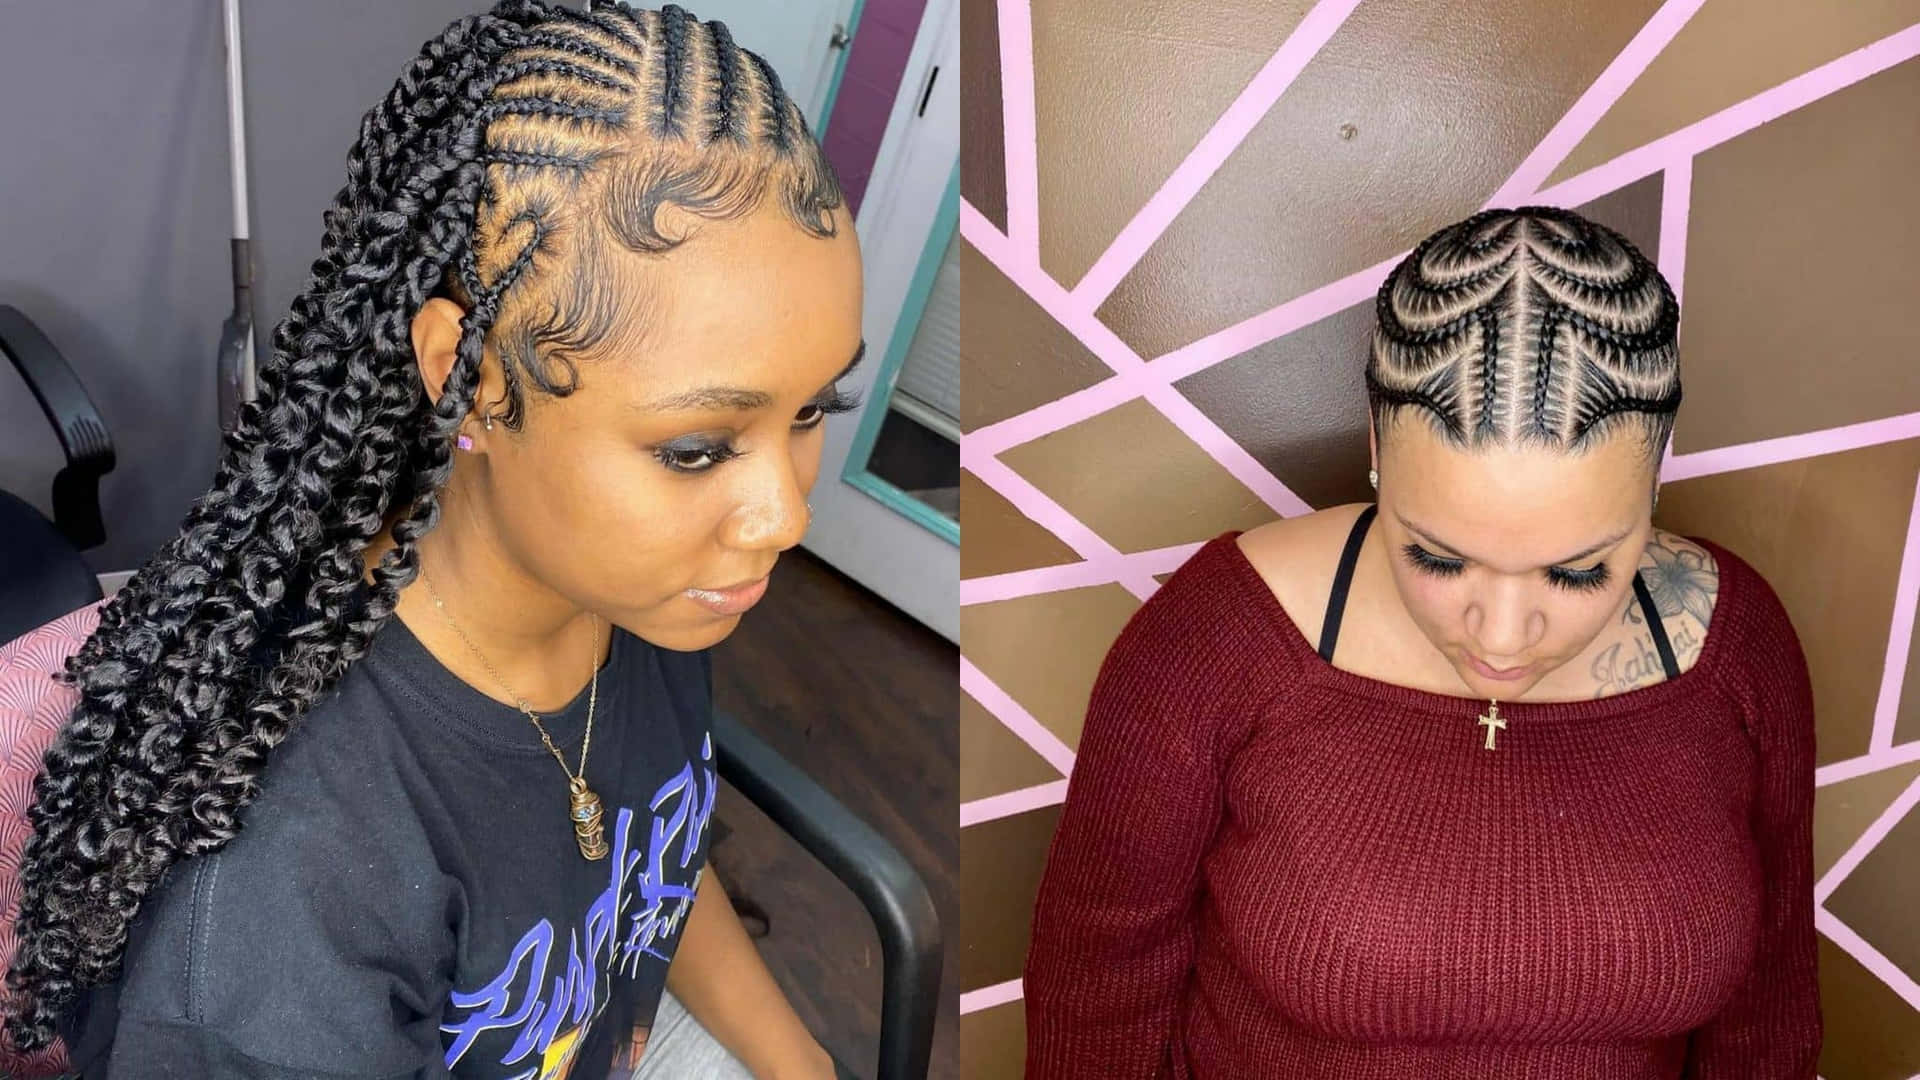 Two Pictures Of A Woman With Braids